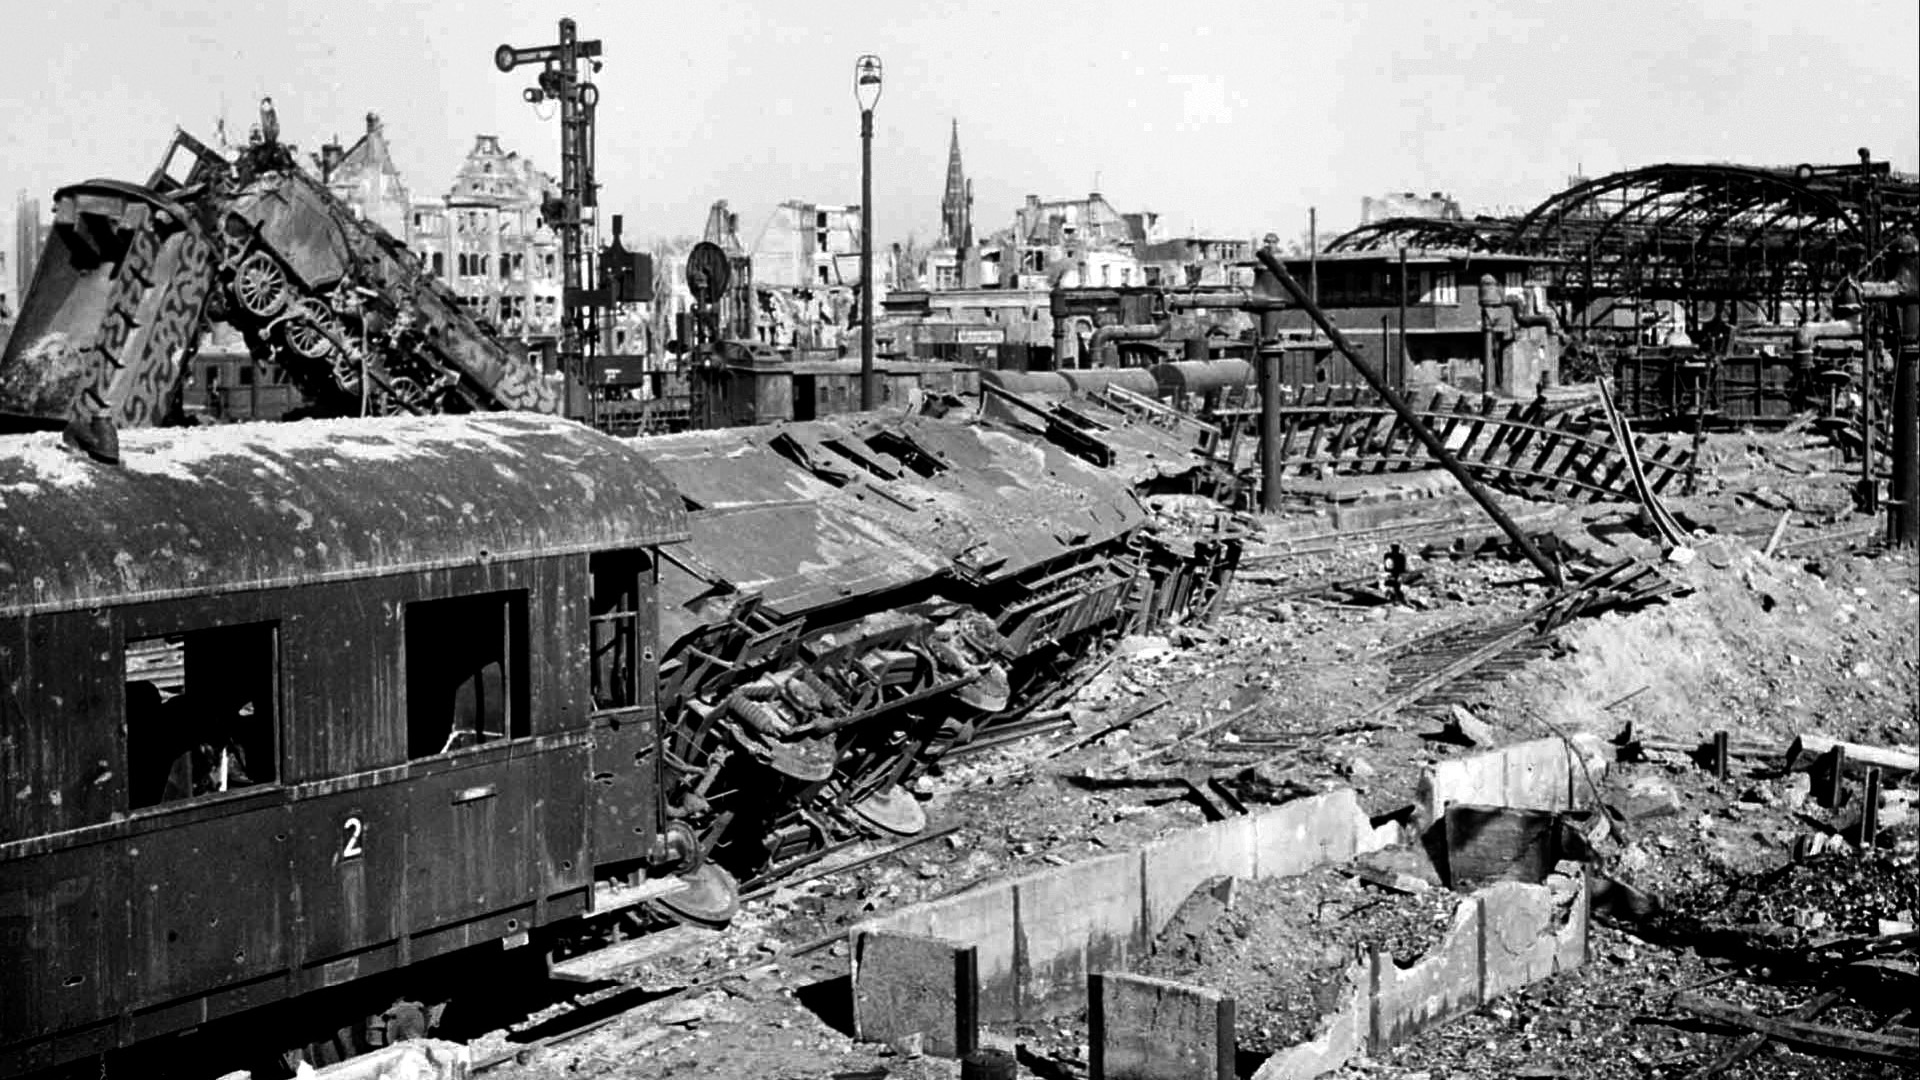 The rail hub of Münster was a frequent target for Allied bombers during World War II, as this April 1945 photo shows. The last air raid against Münster occurred on March 25, 1945.